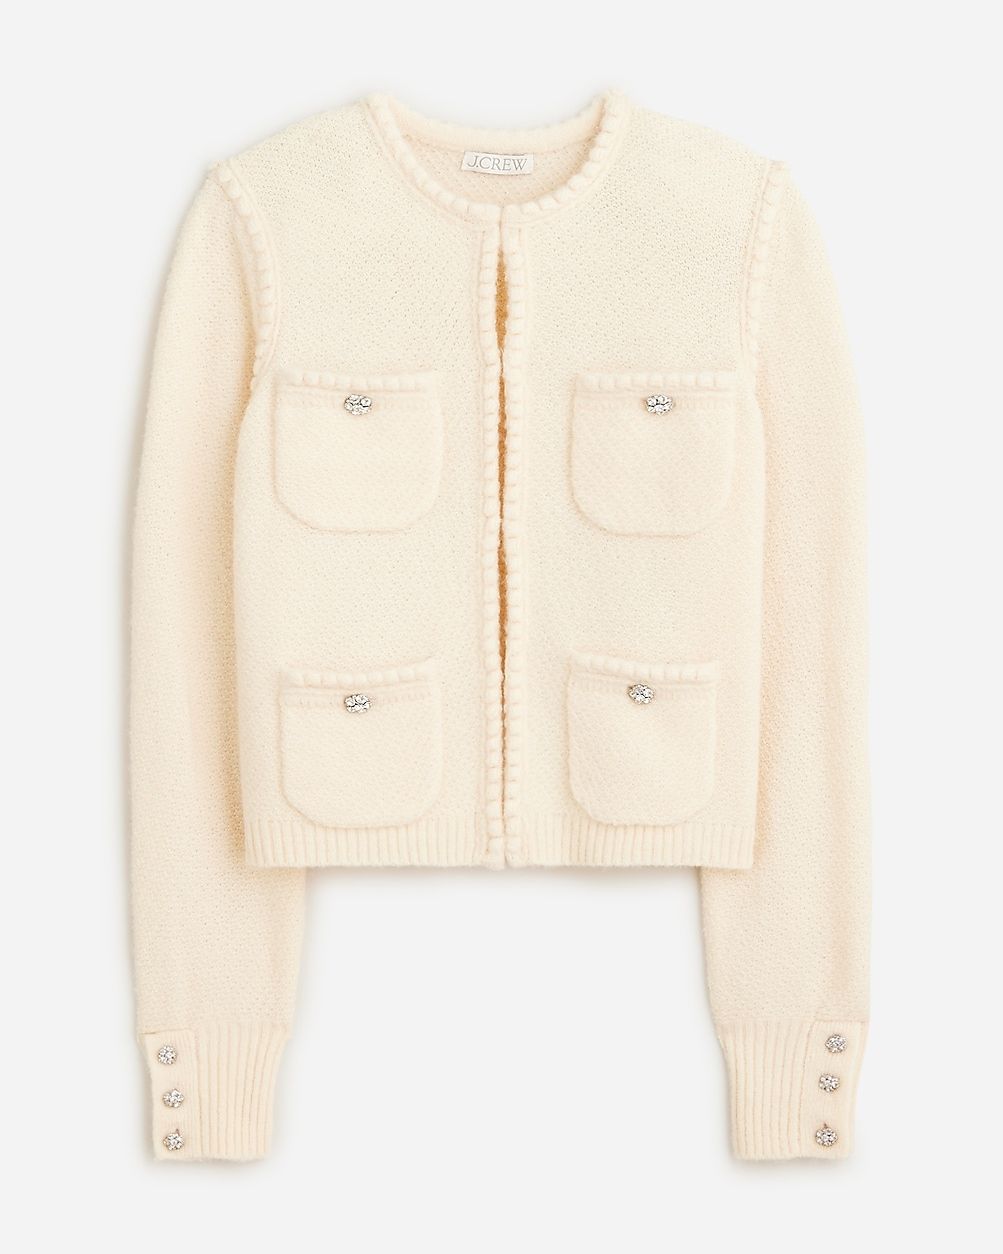 Odette sweater lady jacket with jewel buttons | J.Crew US